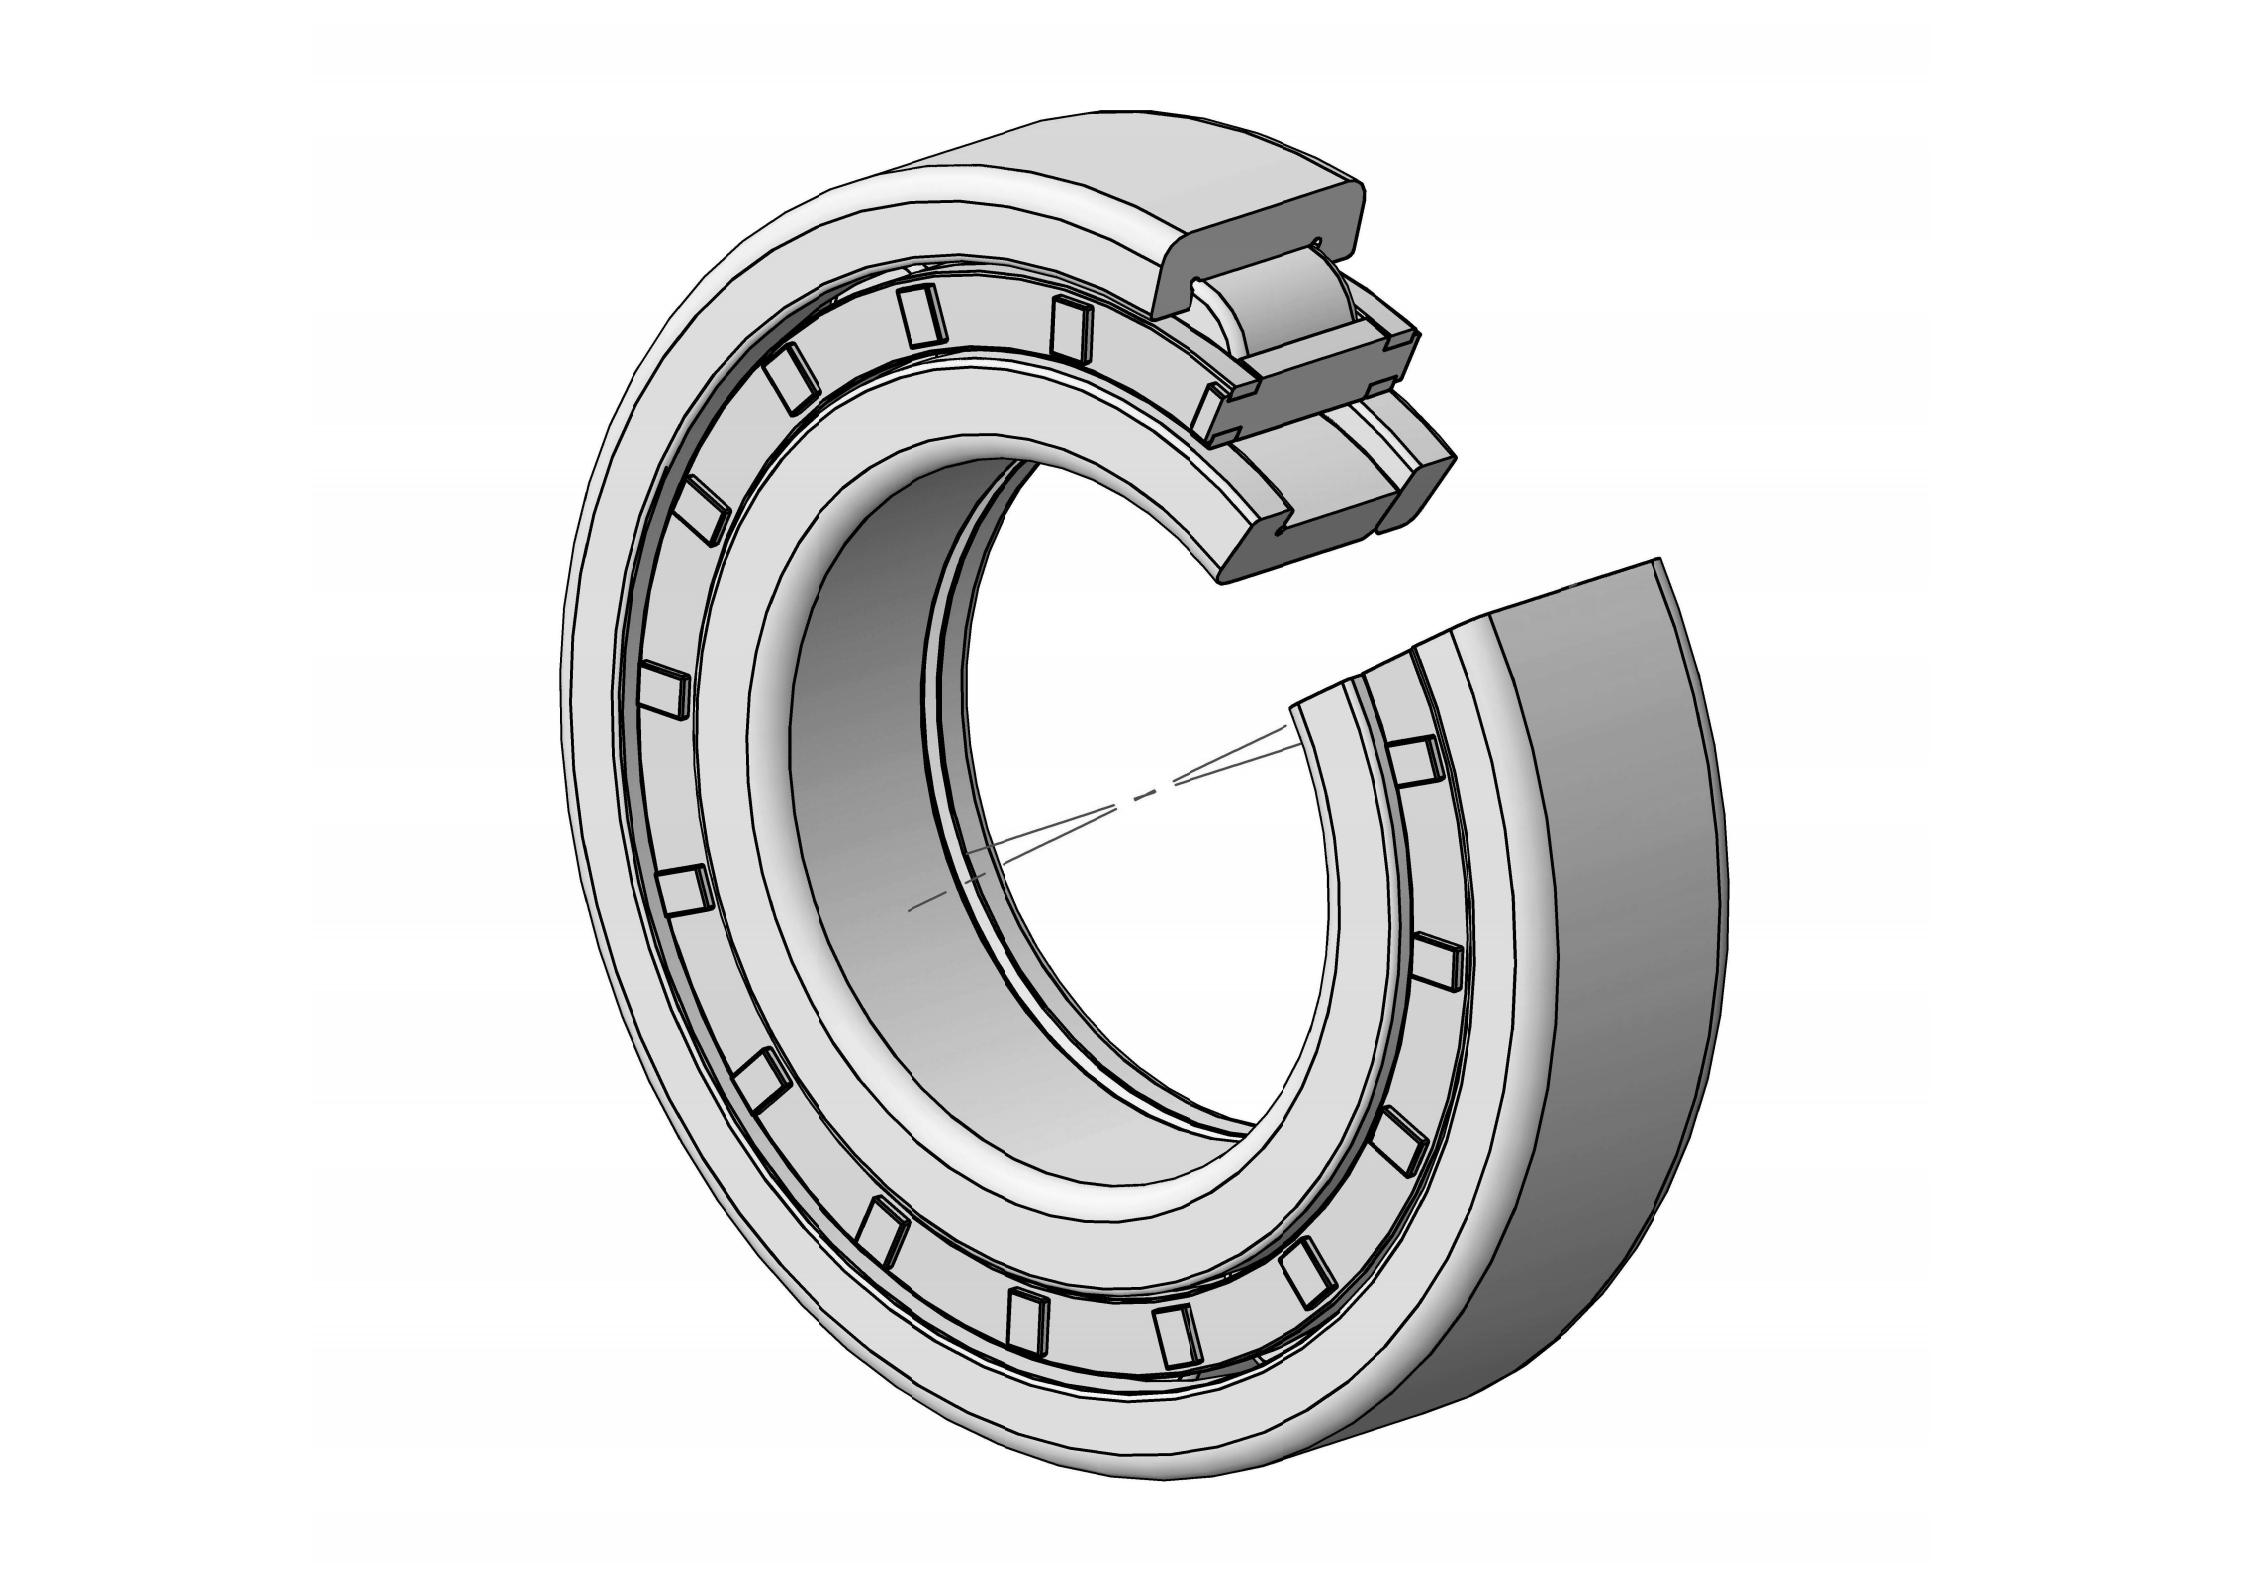 NUP2234-EM Single Row Cylindrical roller bearing 